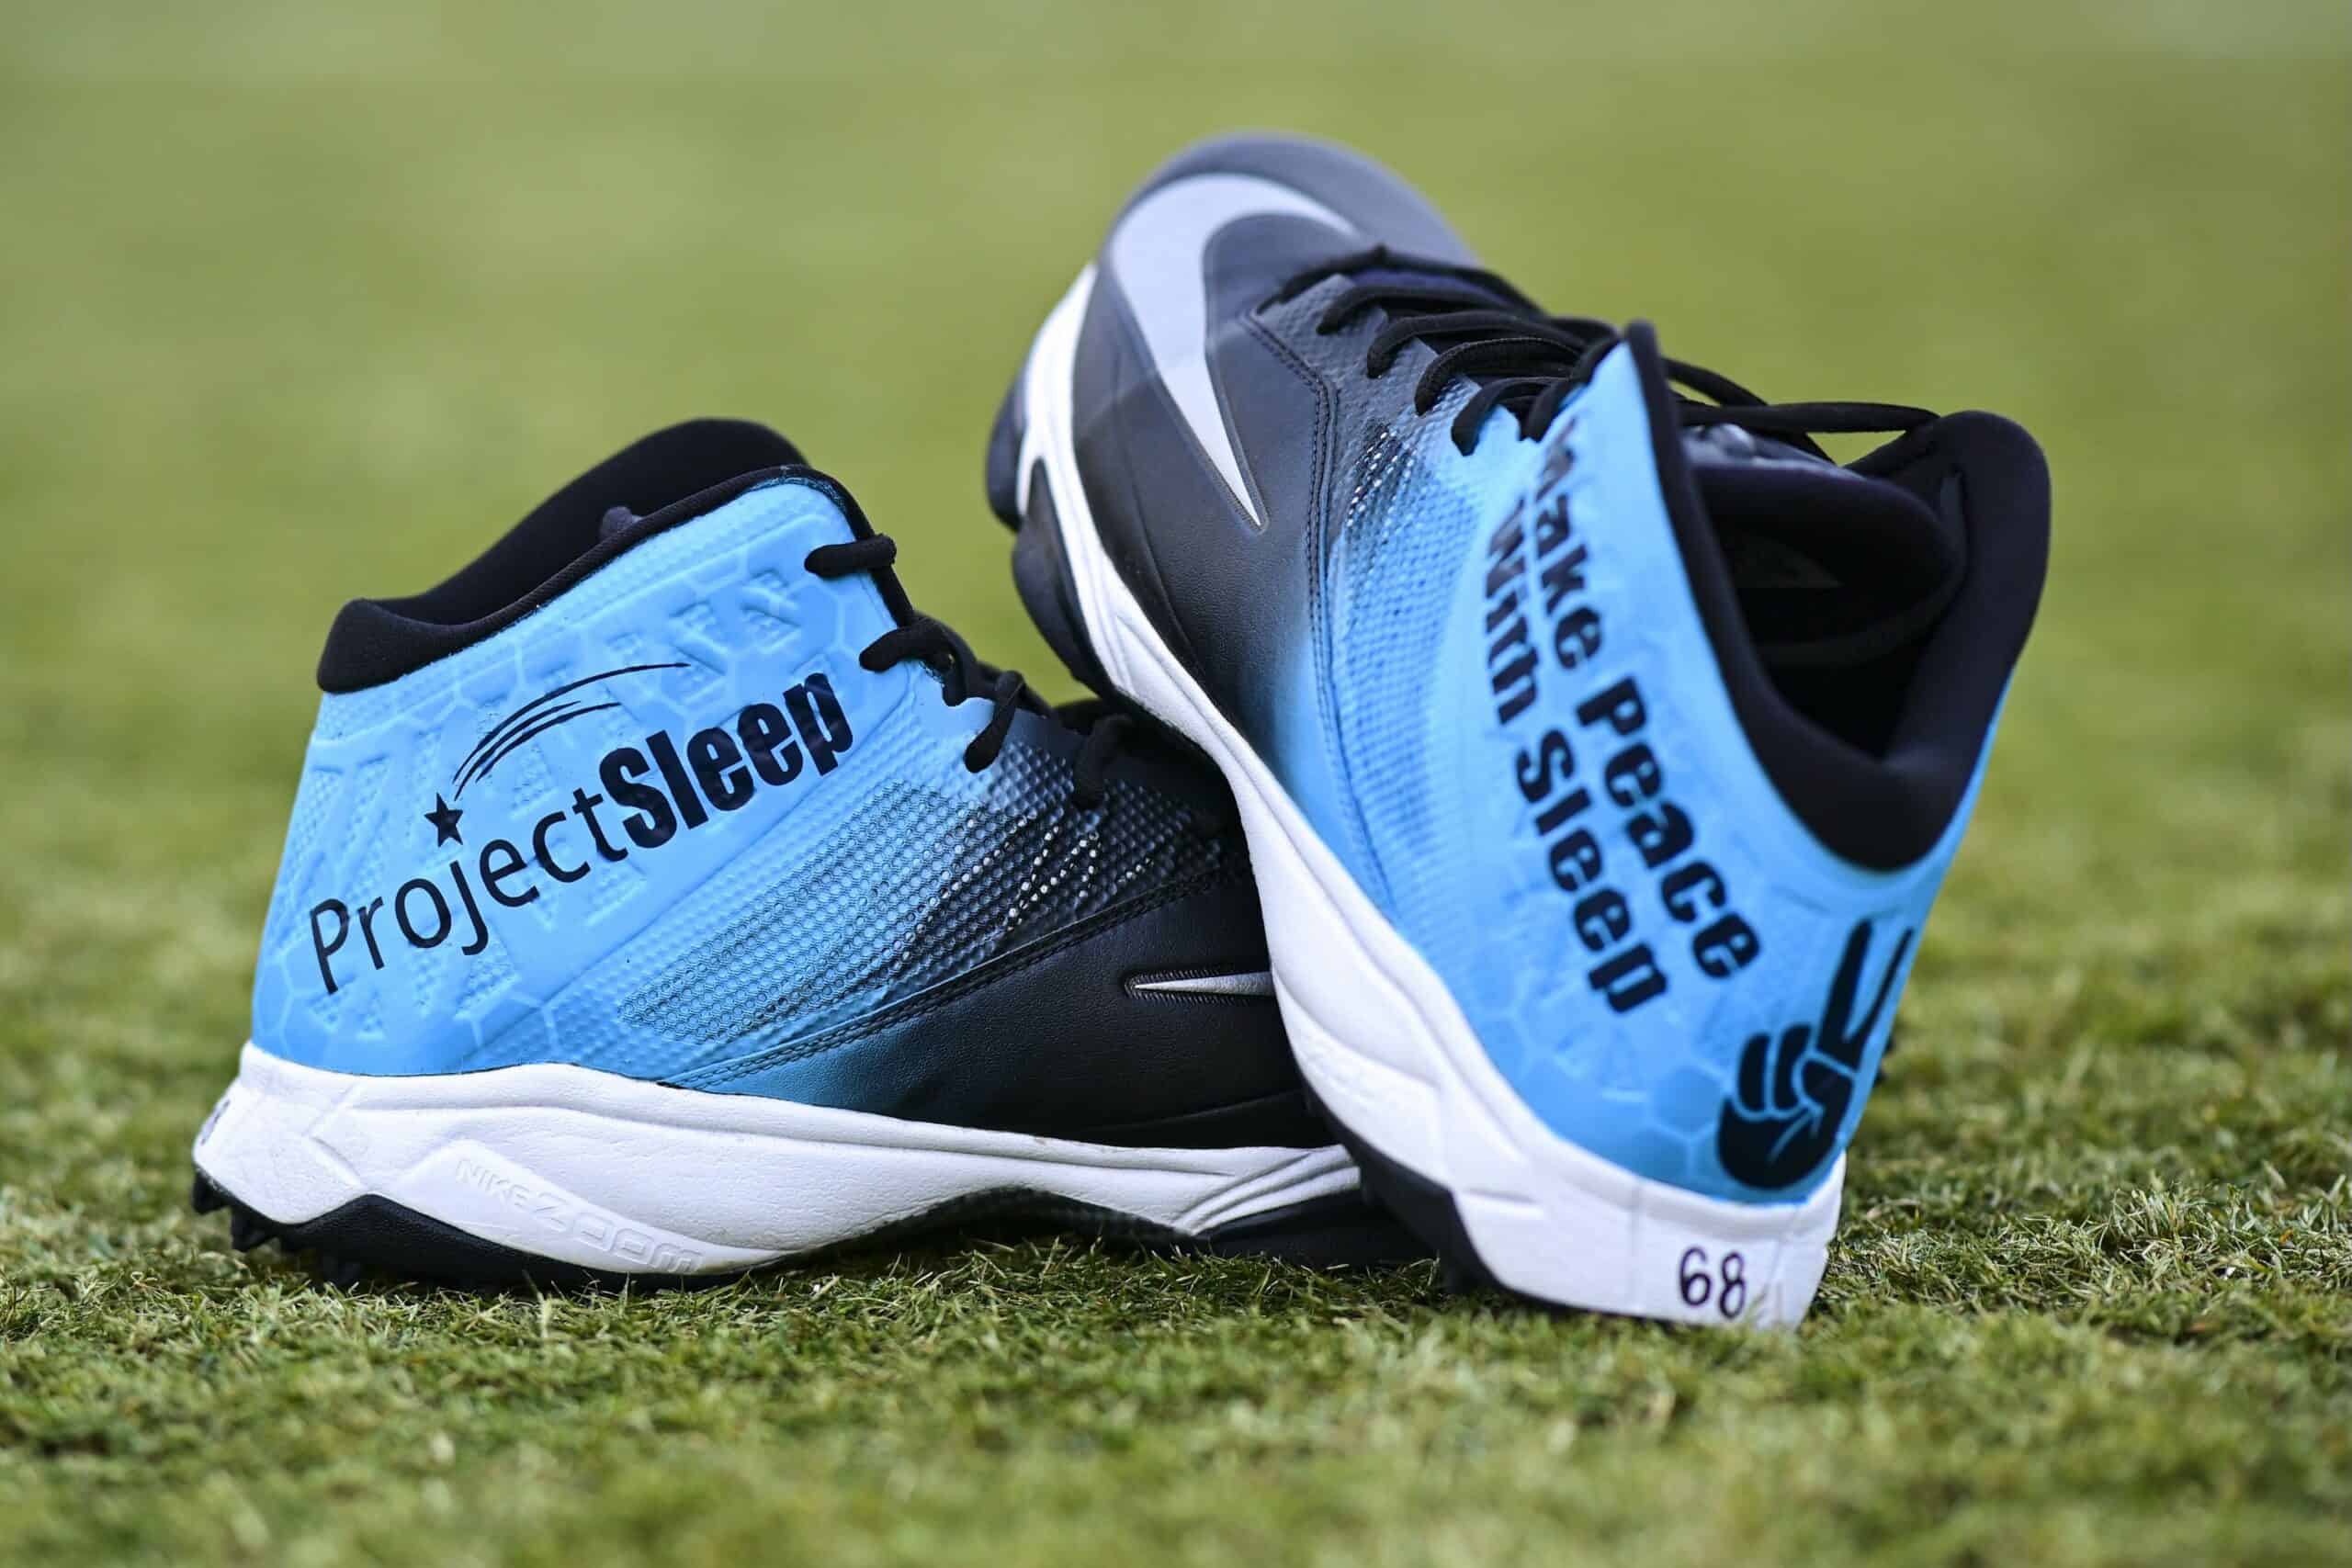 NFL players' cleats for a cause